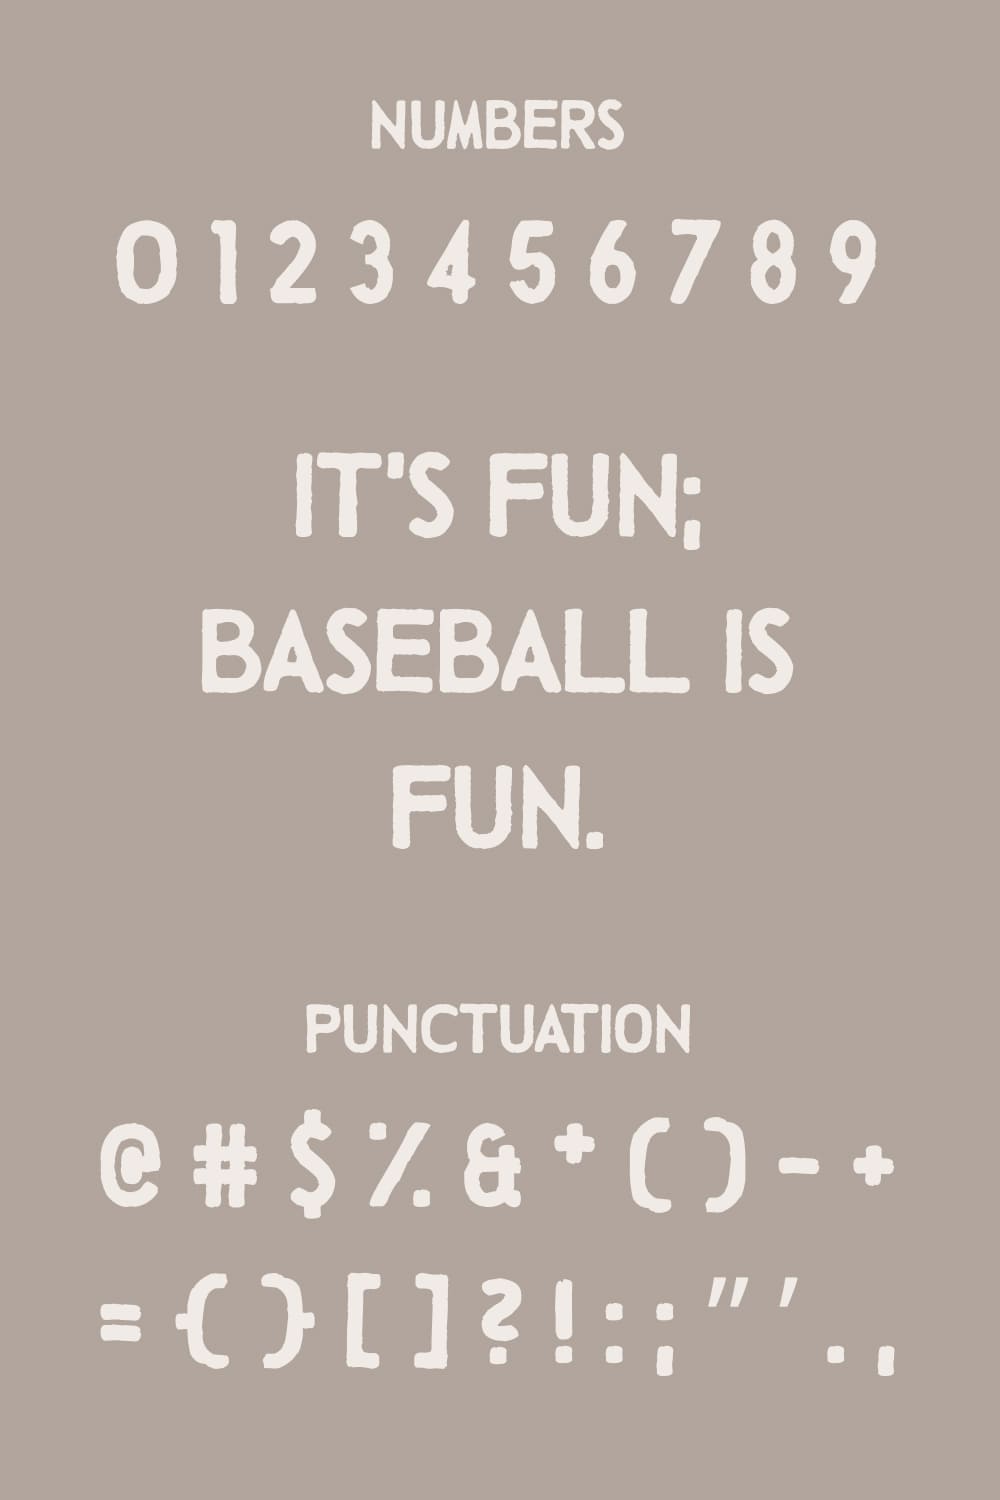 Details and numbers of talking baseball font.